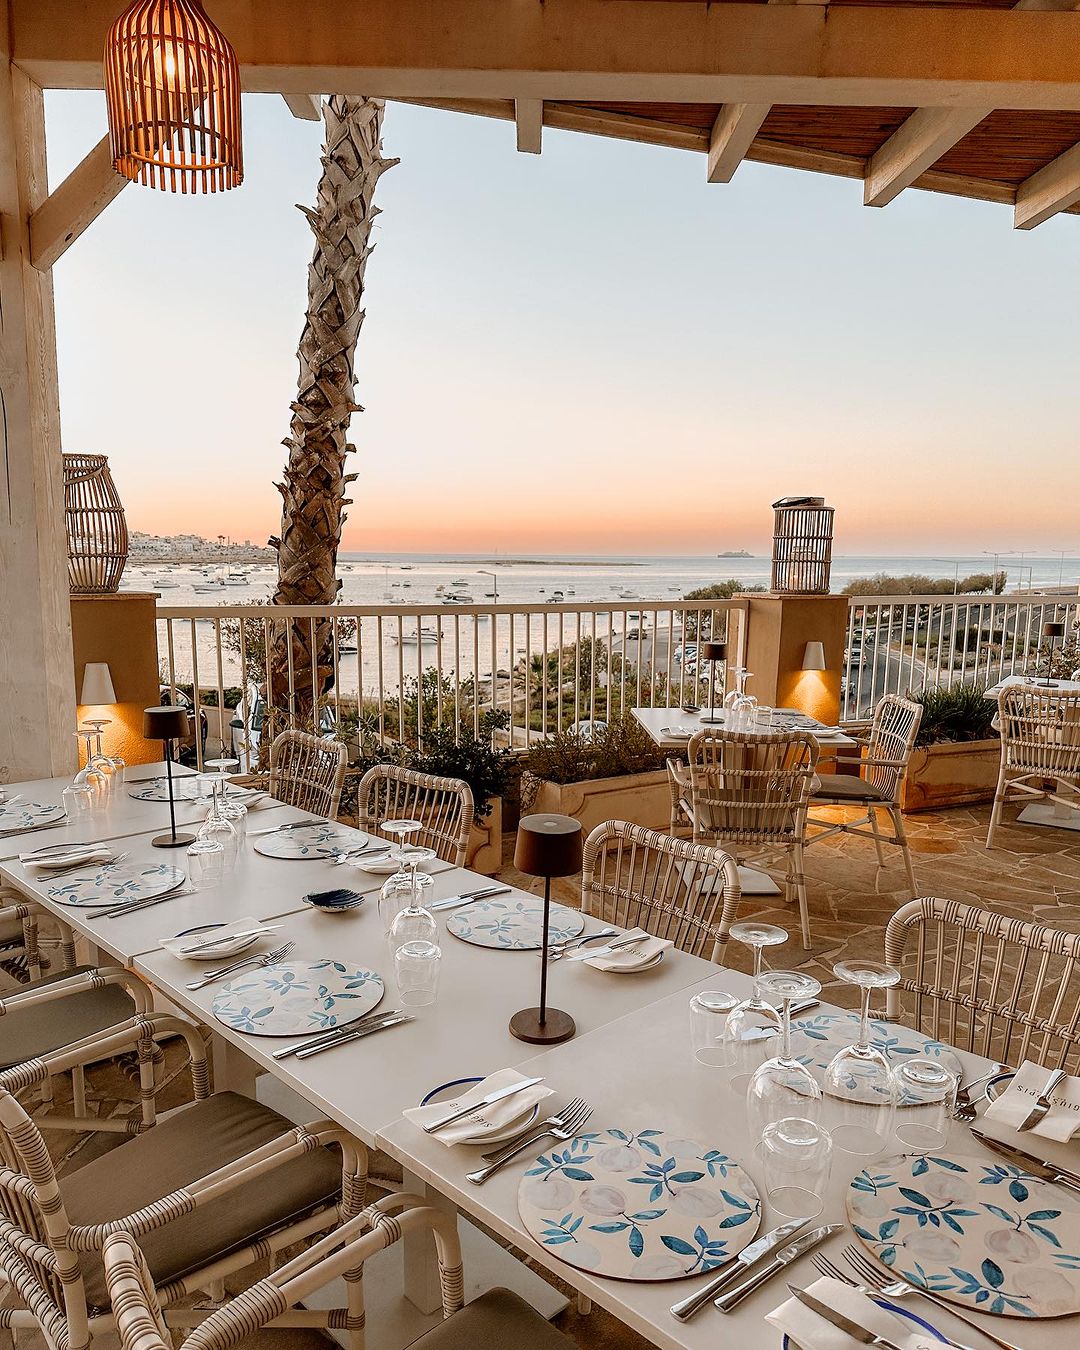 The perfect spot - Great food, good company, and top views - Al Fresco Dining Spots in Malta